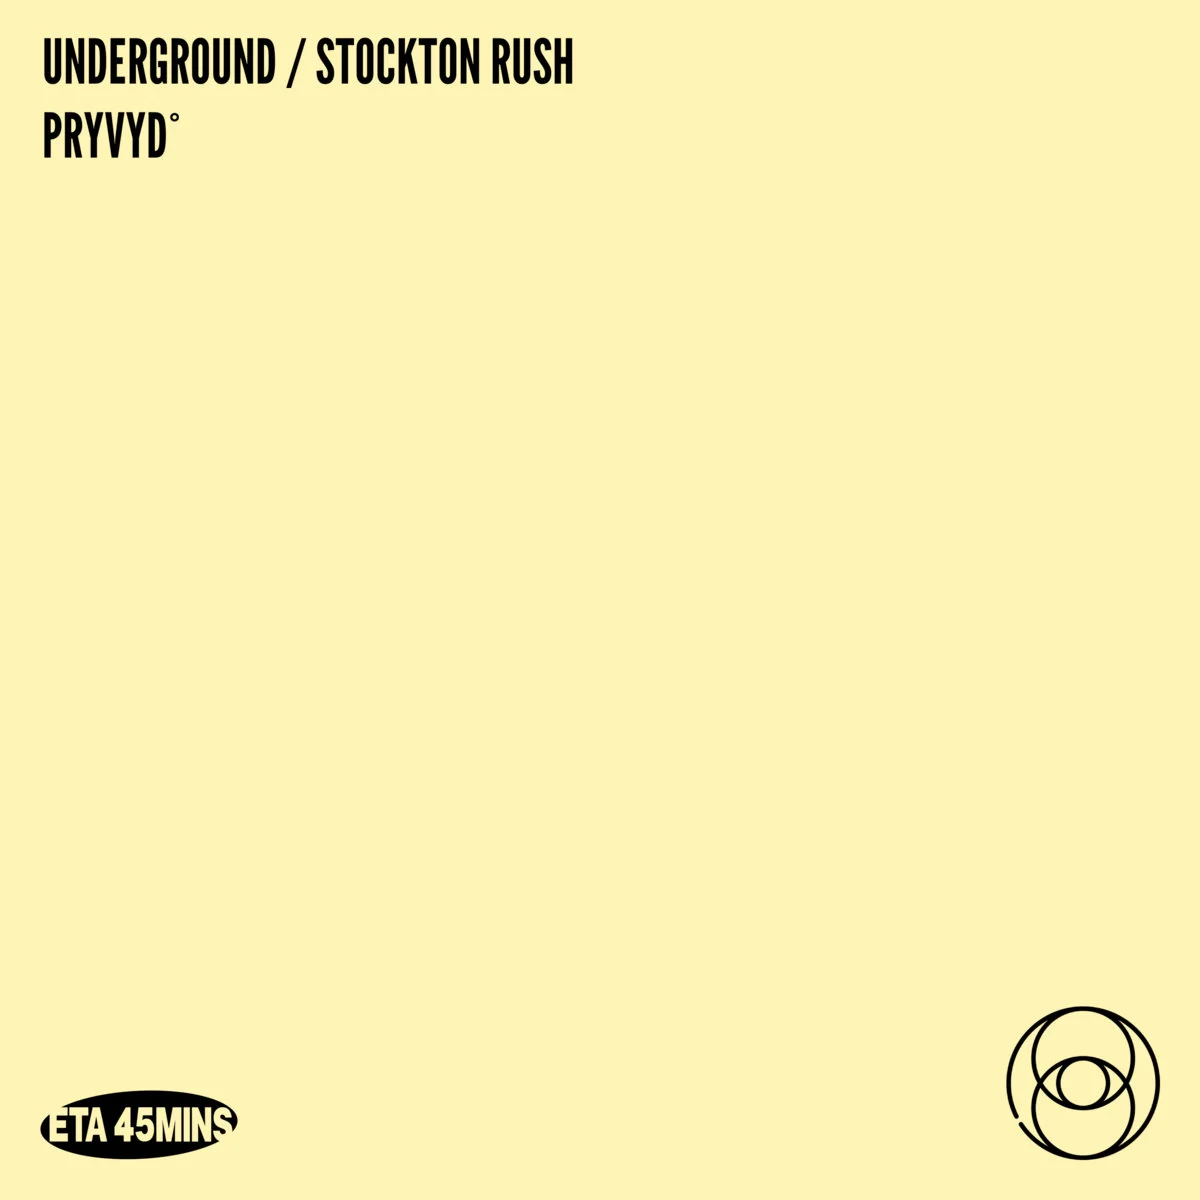 UNDERGROUND/STOCKTON RUSH. Debut release from Lost and Found's PRYVYD. [ETA006]